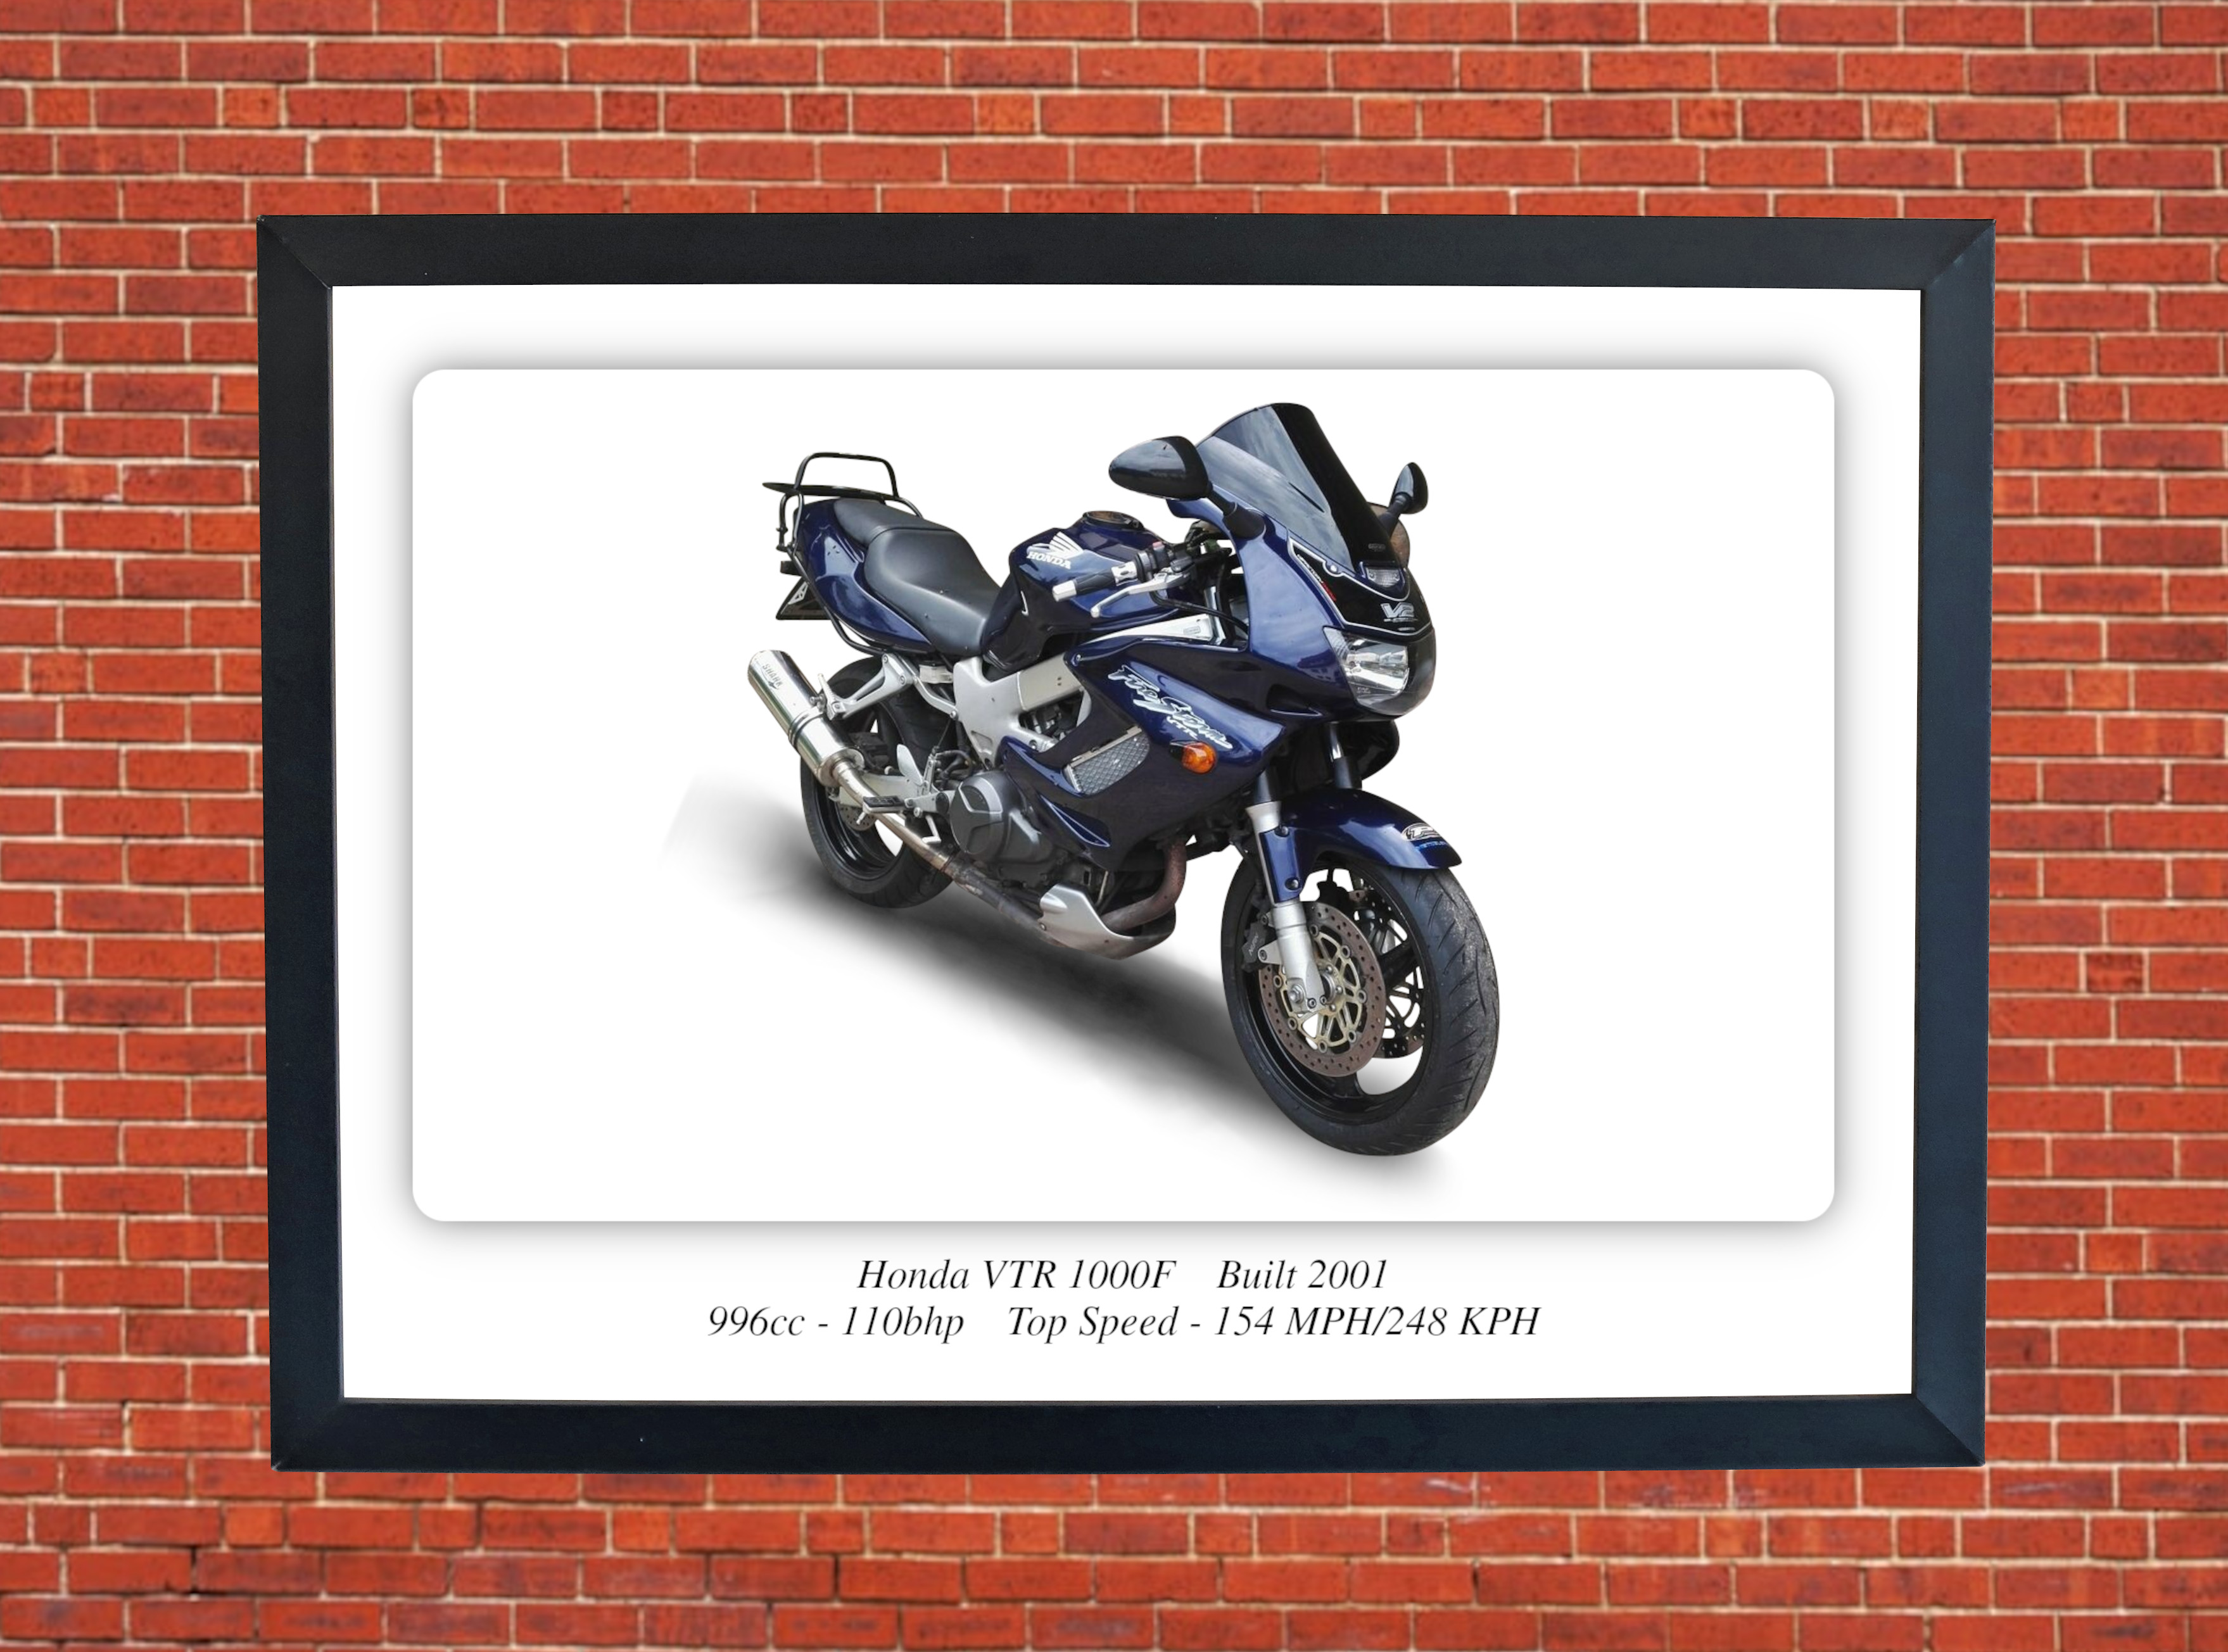 Honda VTR 1000F Motorbike Motorcycle - A3/A4 Size Print Poster